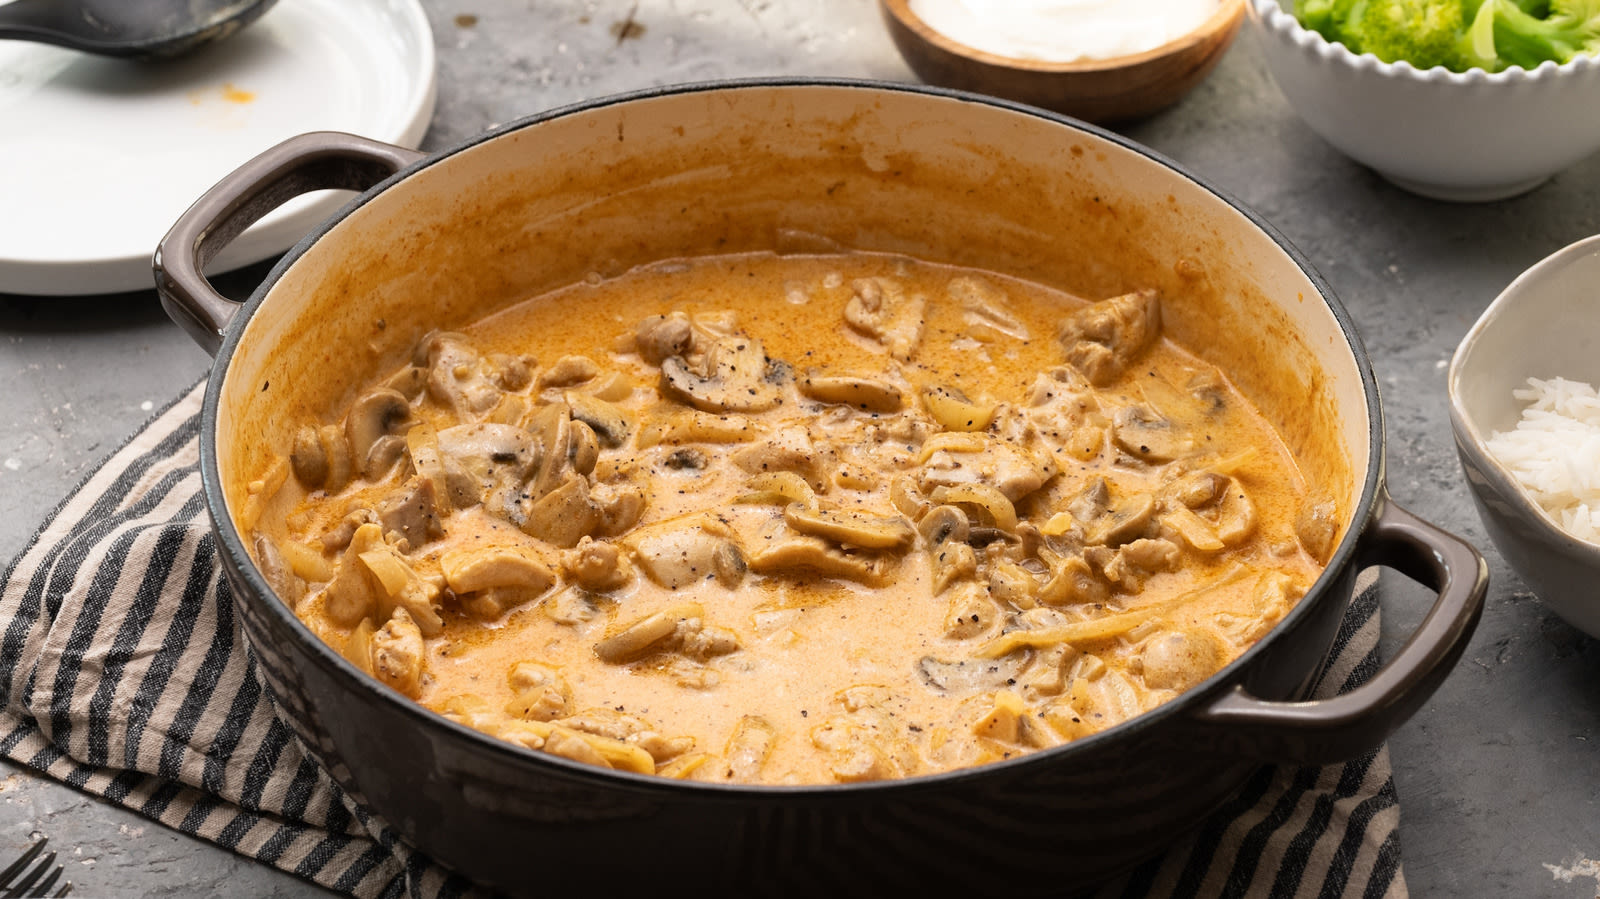 10 Chicken And Mushroom Recipes You'll Never Get Bored Of